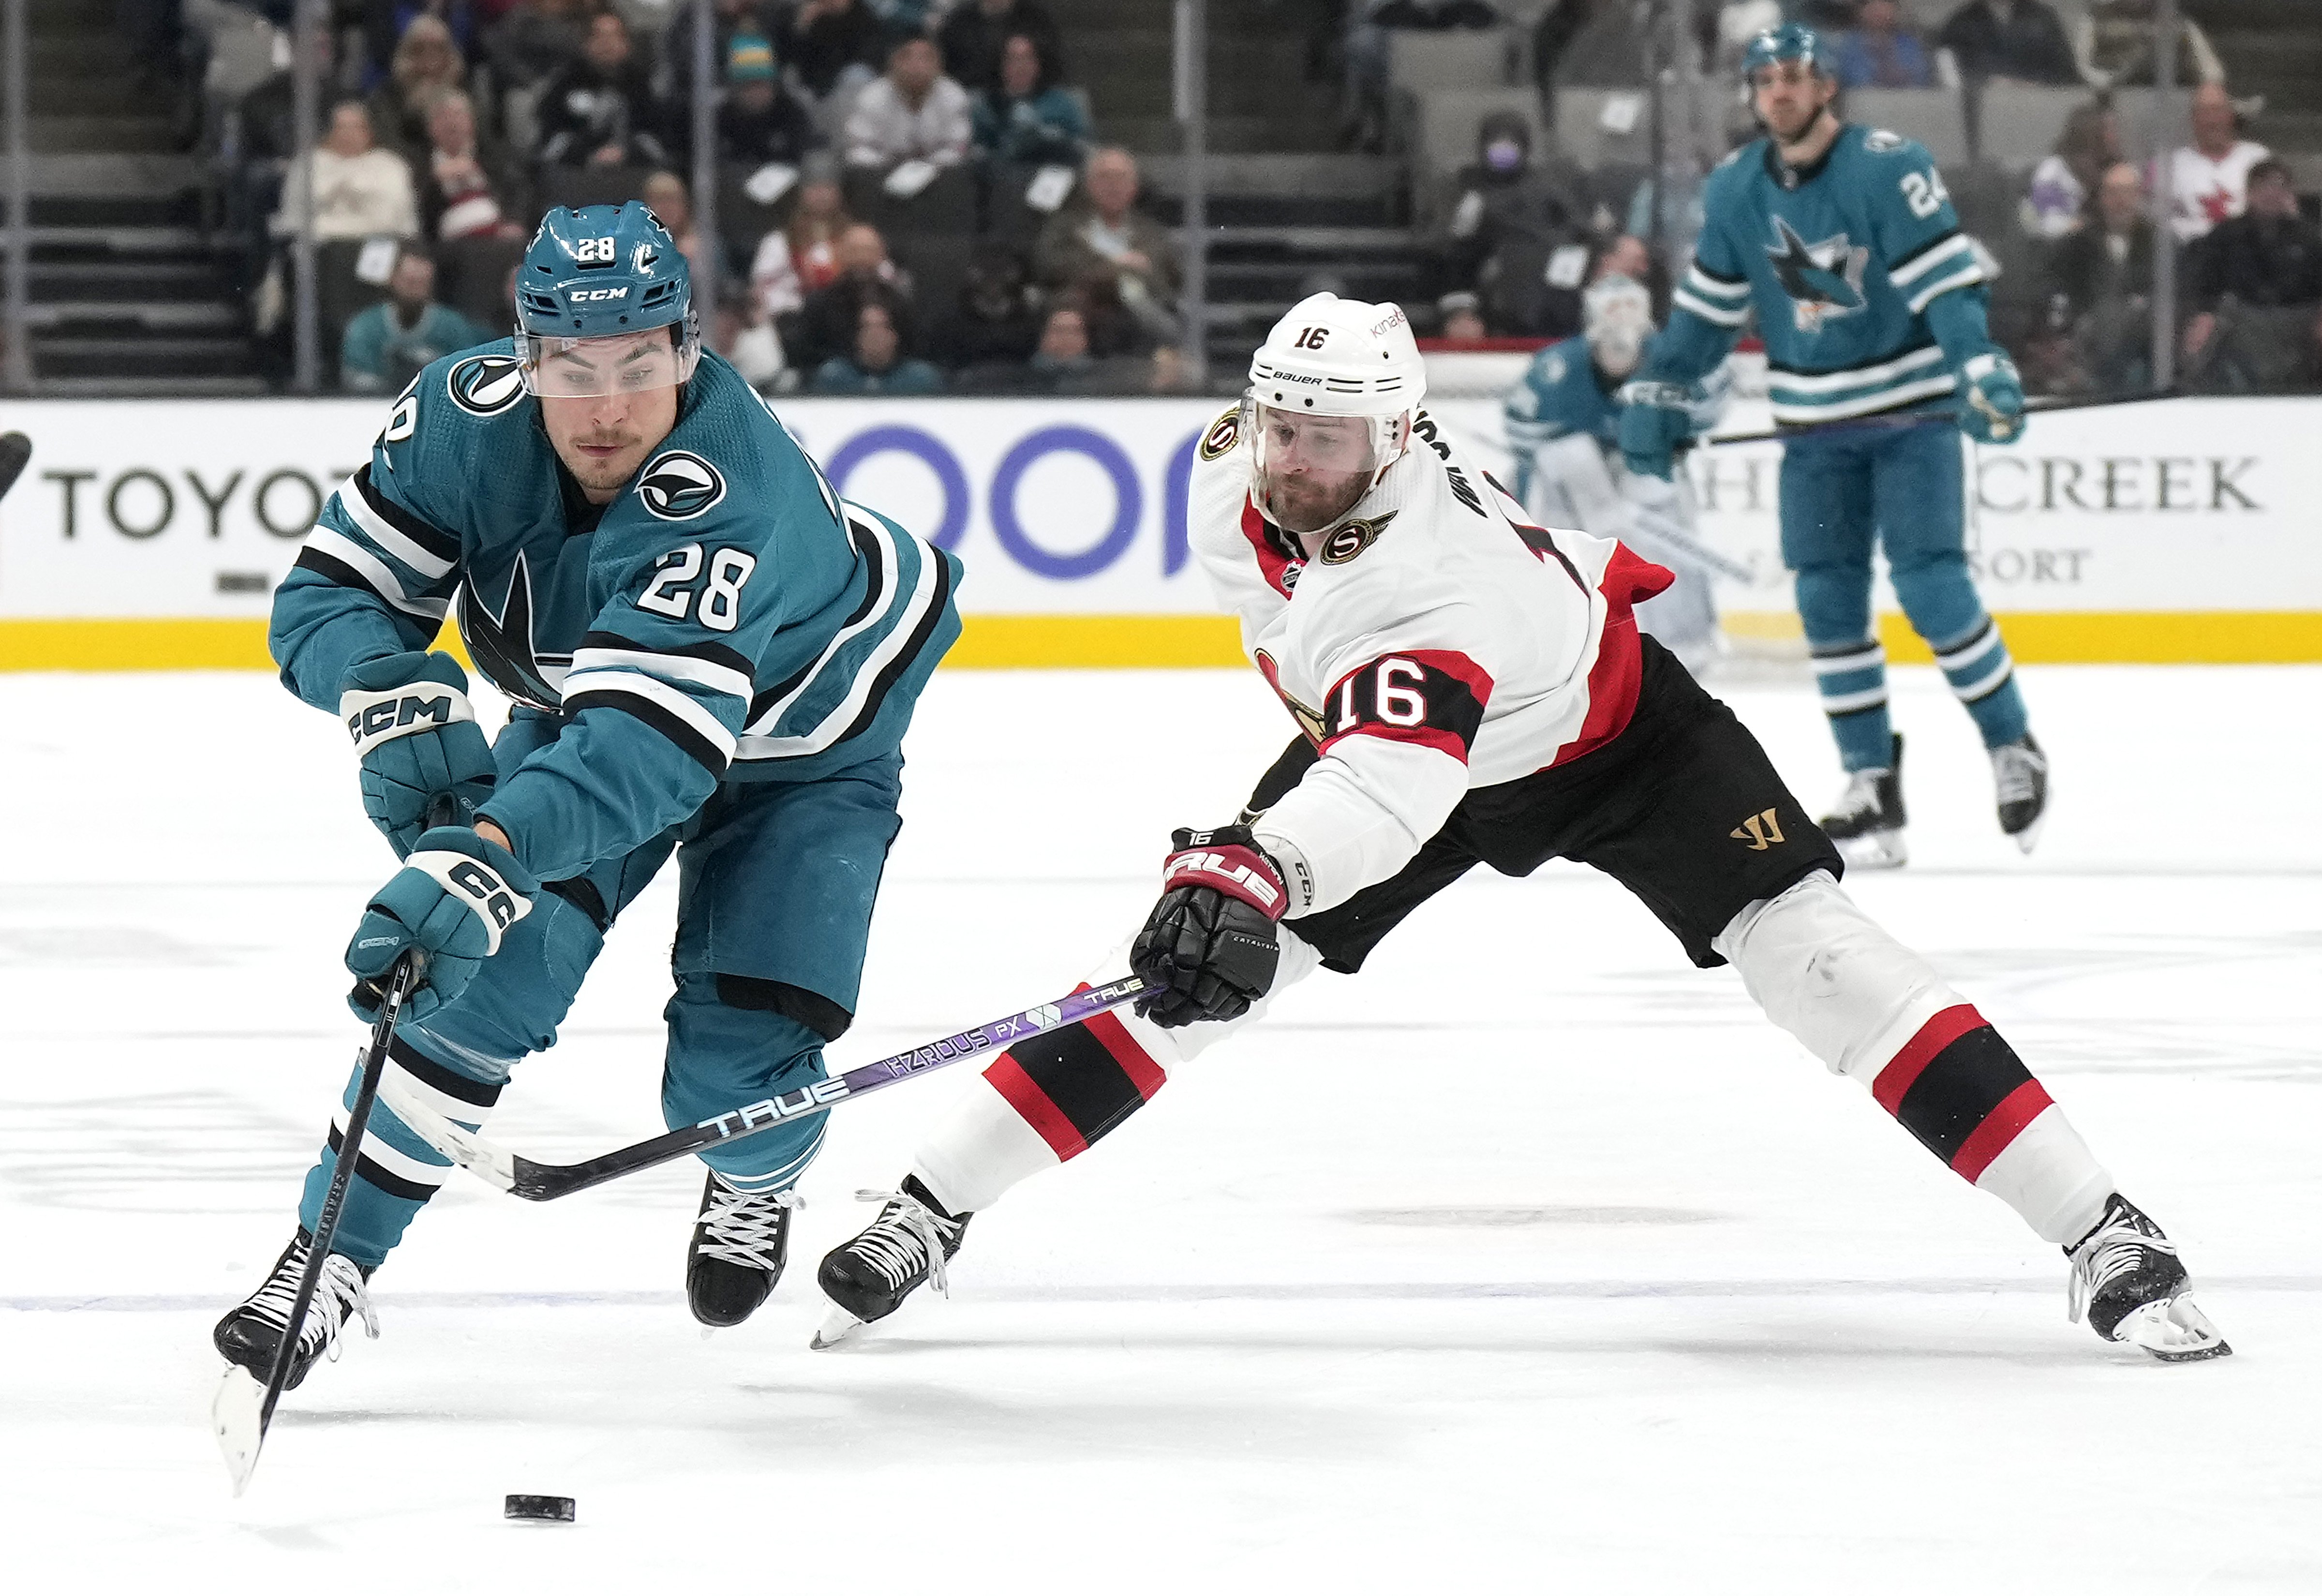 Timo Meier #28 of the San Jose Sharks skates up ice with the puck pursued by Austin Watson #16 of the Ottawa Senators during the second period of an NHL hockey game at SAP Center on November 21, 2022 in San Jose, California.